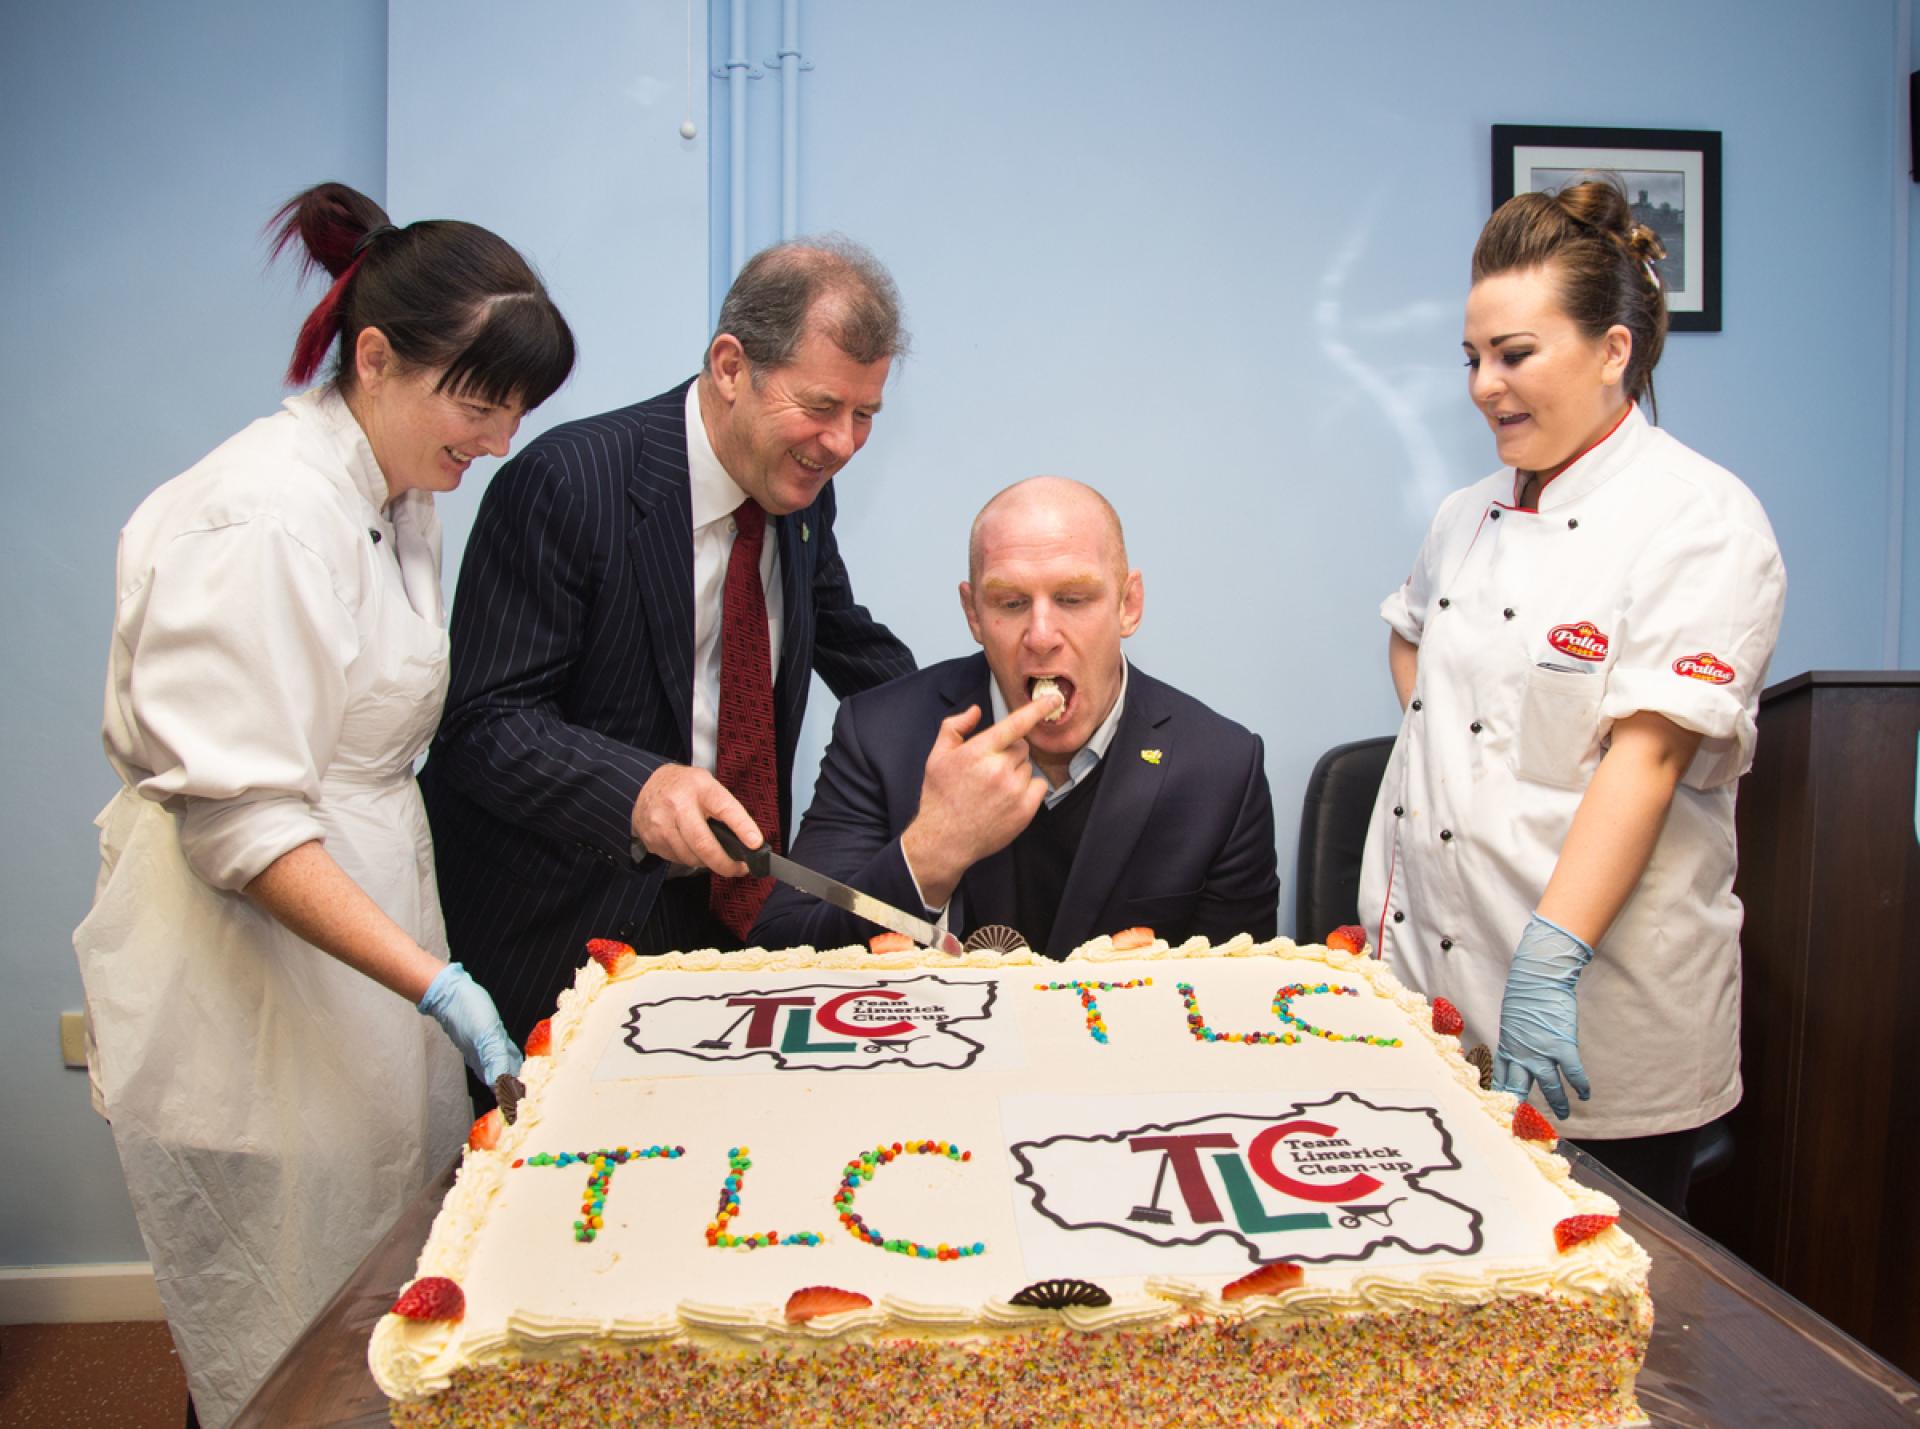 JP McManus and Paul O'Connell sample a TLC cake